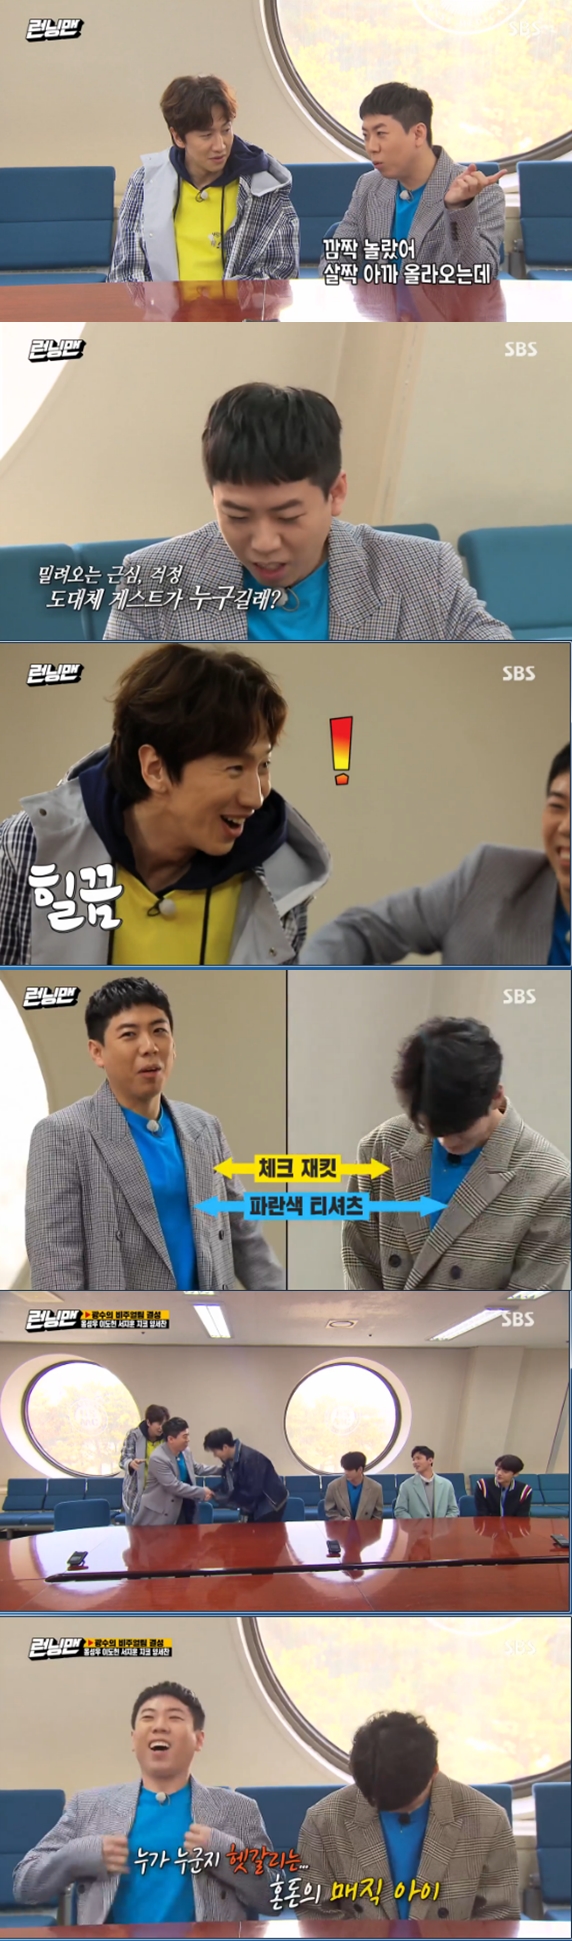 Yang Se-chan was properly humiliated.In the SBS entertainment program Running Man broadcasted on the night of the 29th, Zico, Ong Seong-wu, Lee Do Hyun and Seo Ji Hoon came out as guests and teamed up with Lee Kwang-soo and Yang Se-chan.Yang Se-chan and Lee Kwang-soo were called separately by the production team and were waiting in the waiting room.Yang Se-chan began to worry, There are some people among the guests who overlap fashion with me.Lee Kwang-soo said, I do not know yet.However, the guest that overlaps fashion with Yang Se-chan was Ong Seong-wu, and Yang Se-chan, who confirmed it, did not reach him.Lee Kwang-soo greeted the guests, then deliberately held Ong Seong-wu next to Yang Se-chan.Yang Se-chan hit his hand and laughed, saying, Im going home.